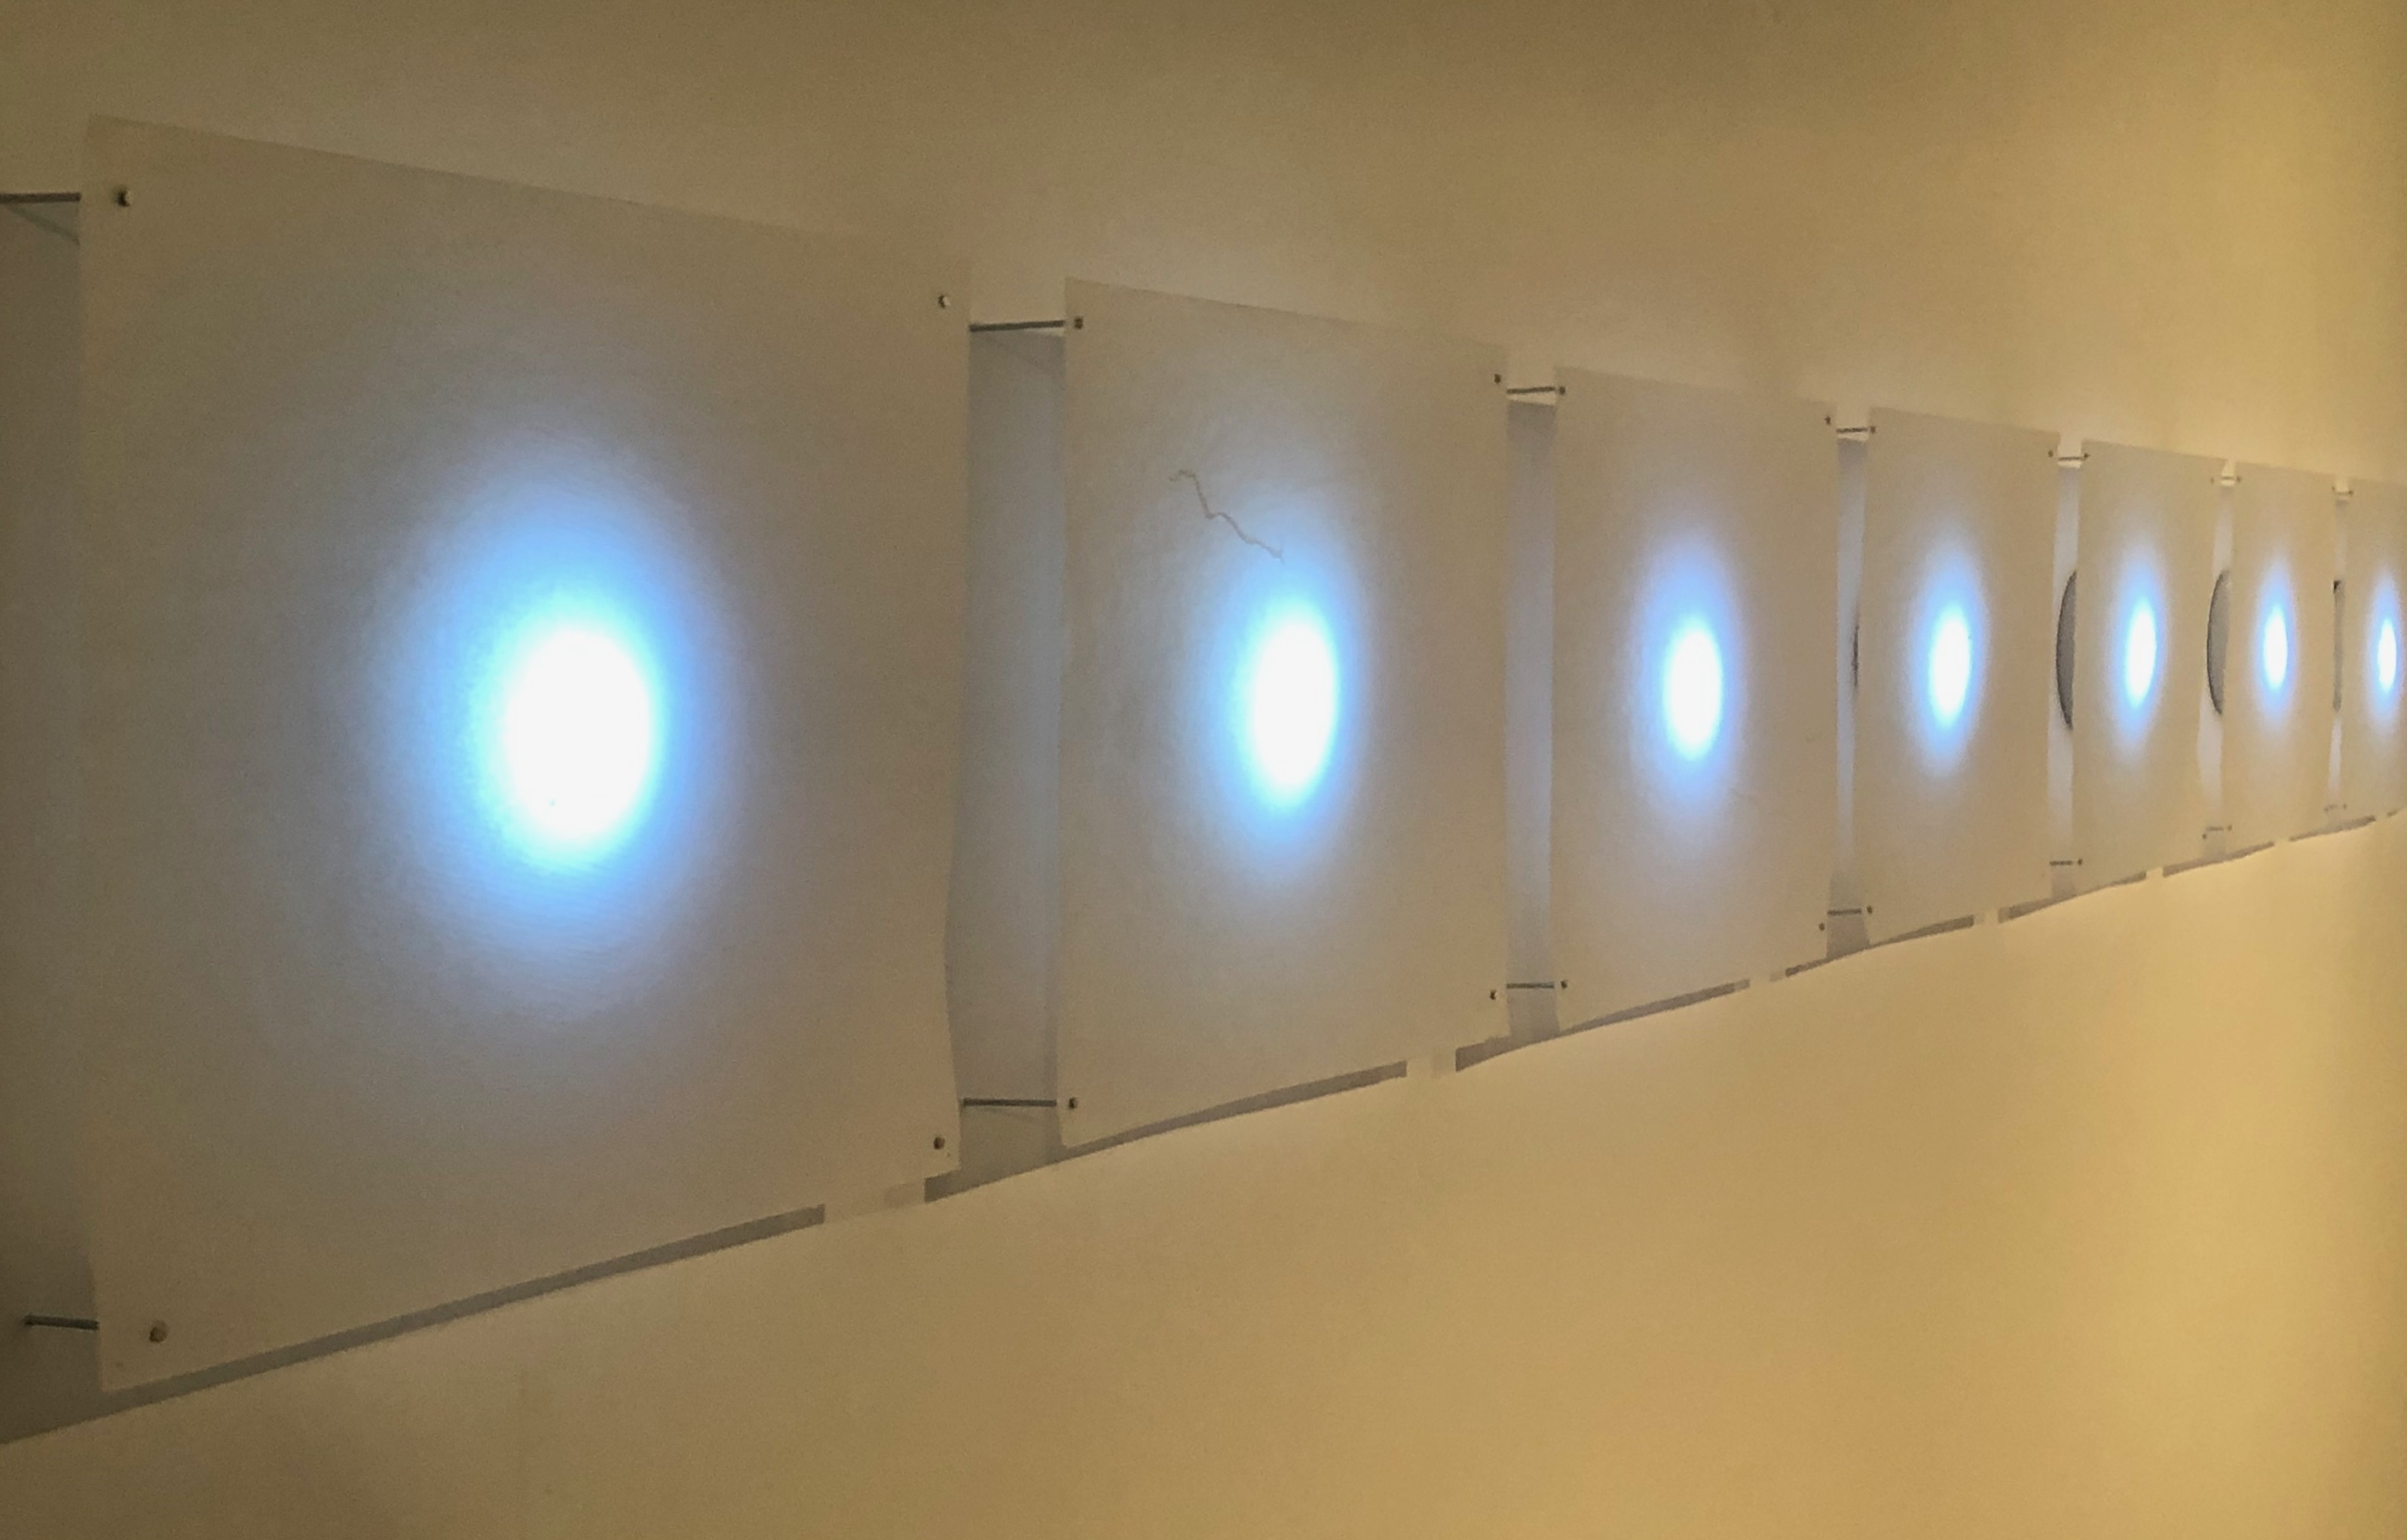 "Cold Data", 2019. 20 drawings of thread on paper (tracing paper). Installation. Unique piece. Variable measures.